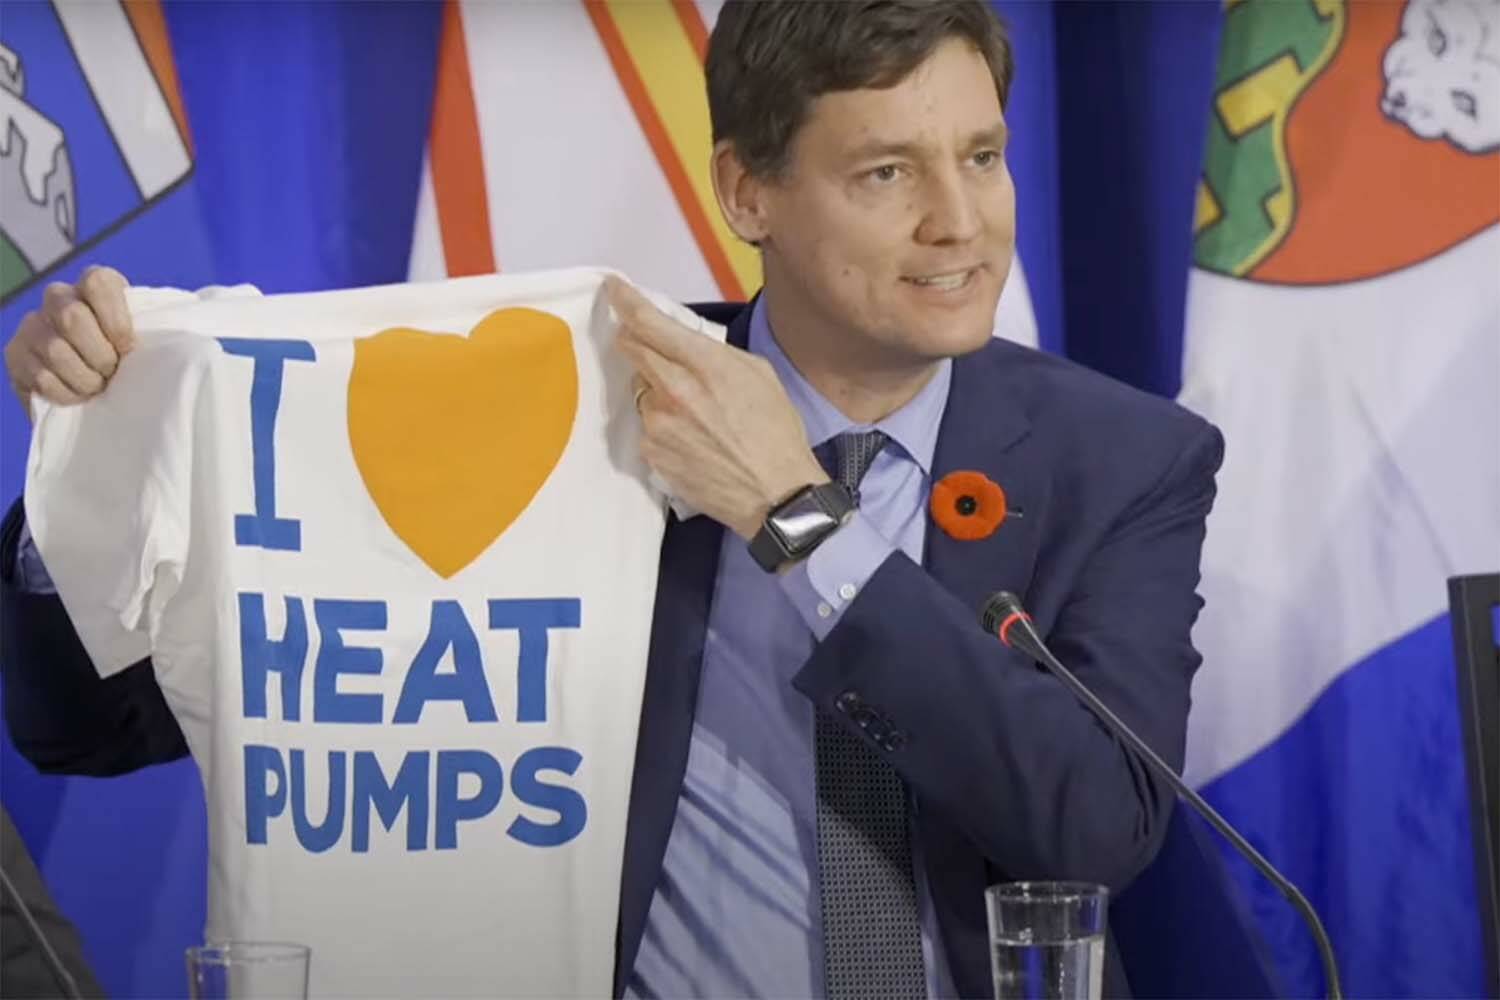 Premier David Eby, here seen in early November 2023, said his government is close to announcing “better cooperation” with the federal government on financial support for heat pumps as well as heating costs generally. (Screencap) (Screencap)